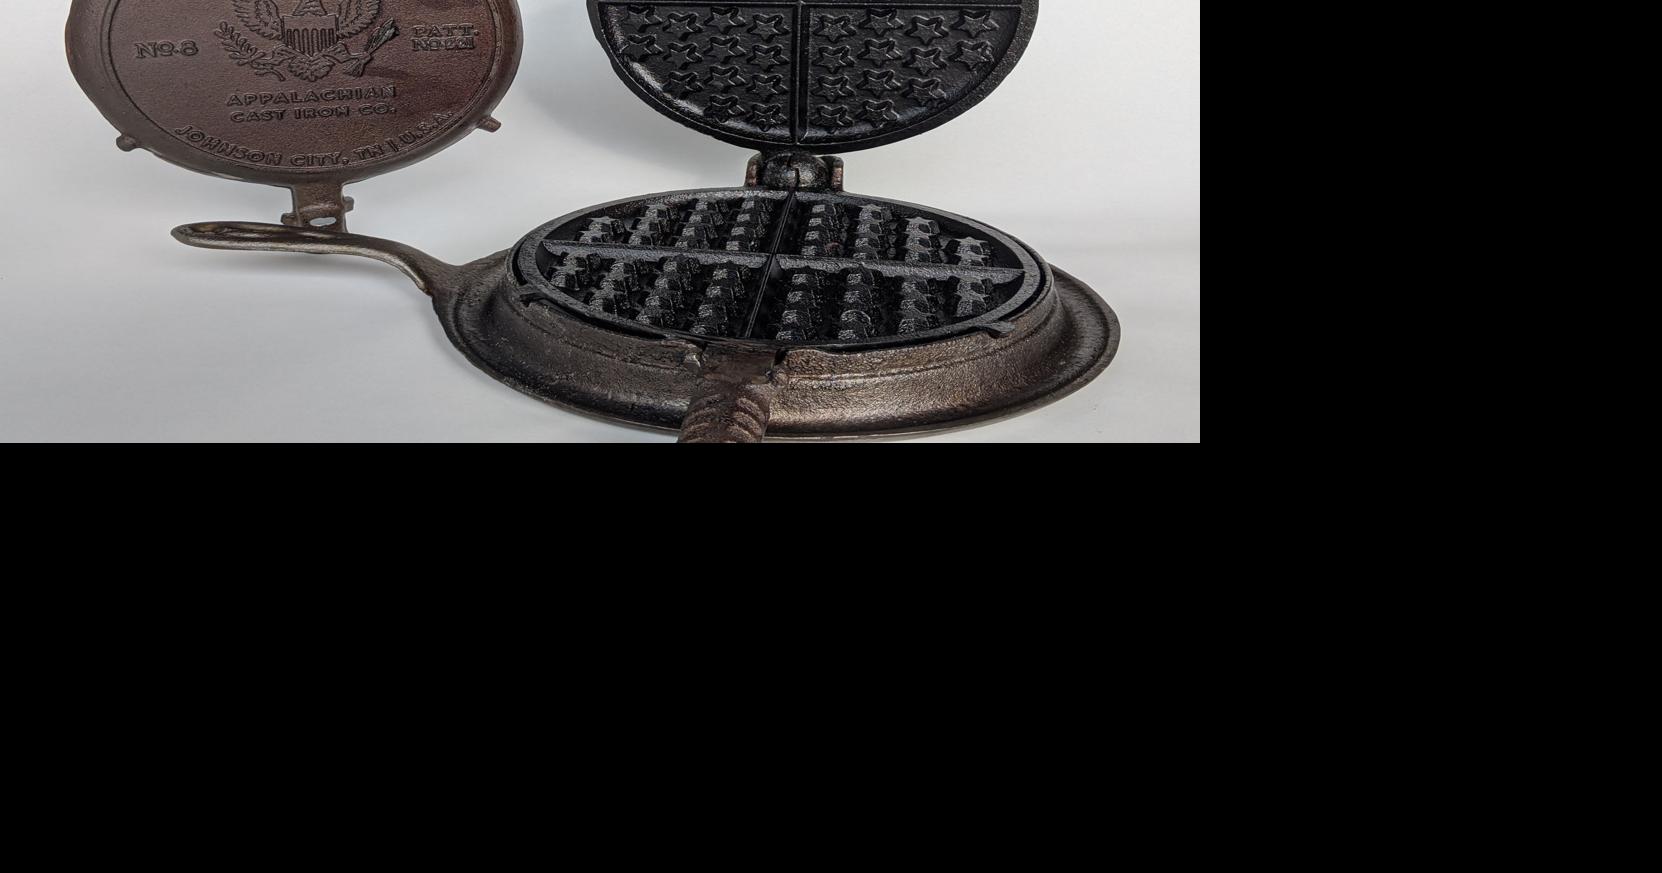 APPALACHIAN CAST IRON Great American Waffle Iron Pre-Seasoned, PFOA/PTFE  Free, Made In USA | Vintage Inspired, 7 inch Stovetop Waffle Iron With